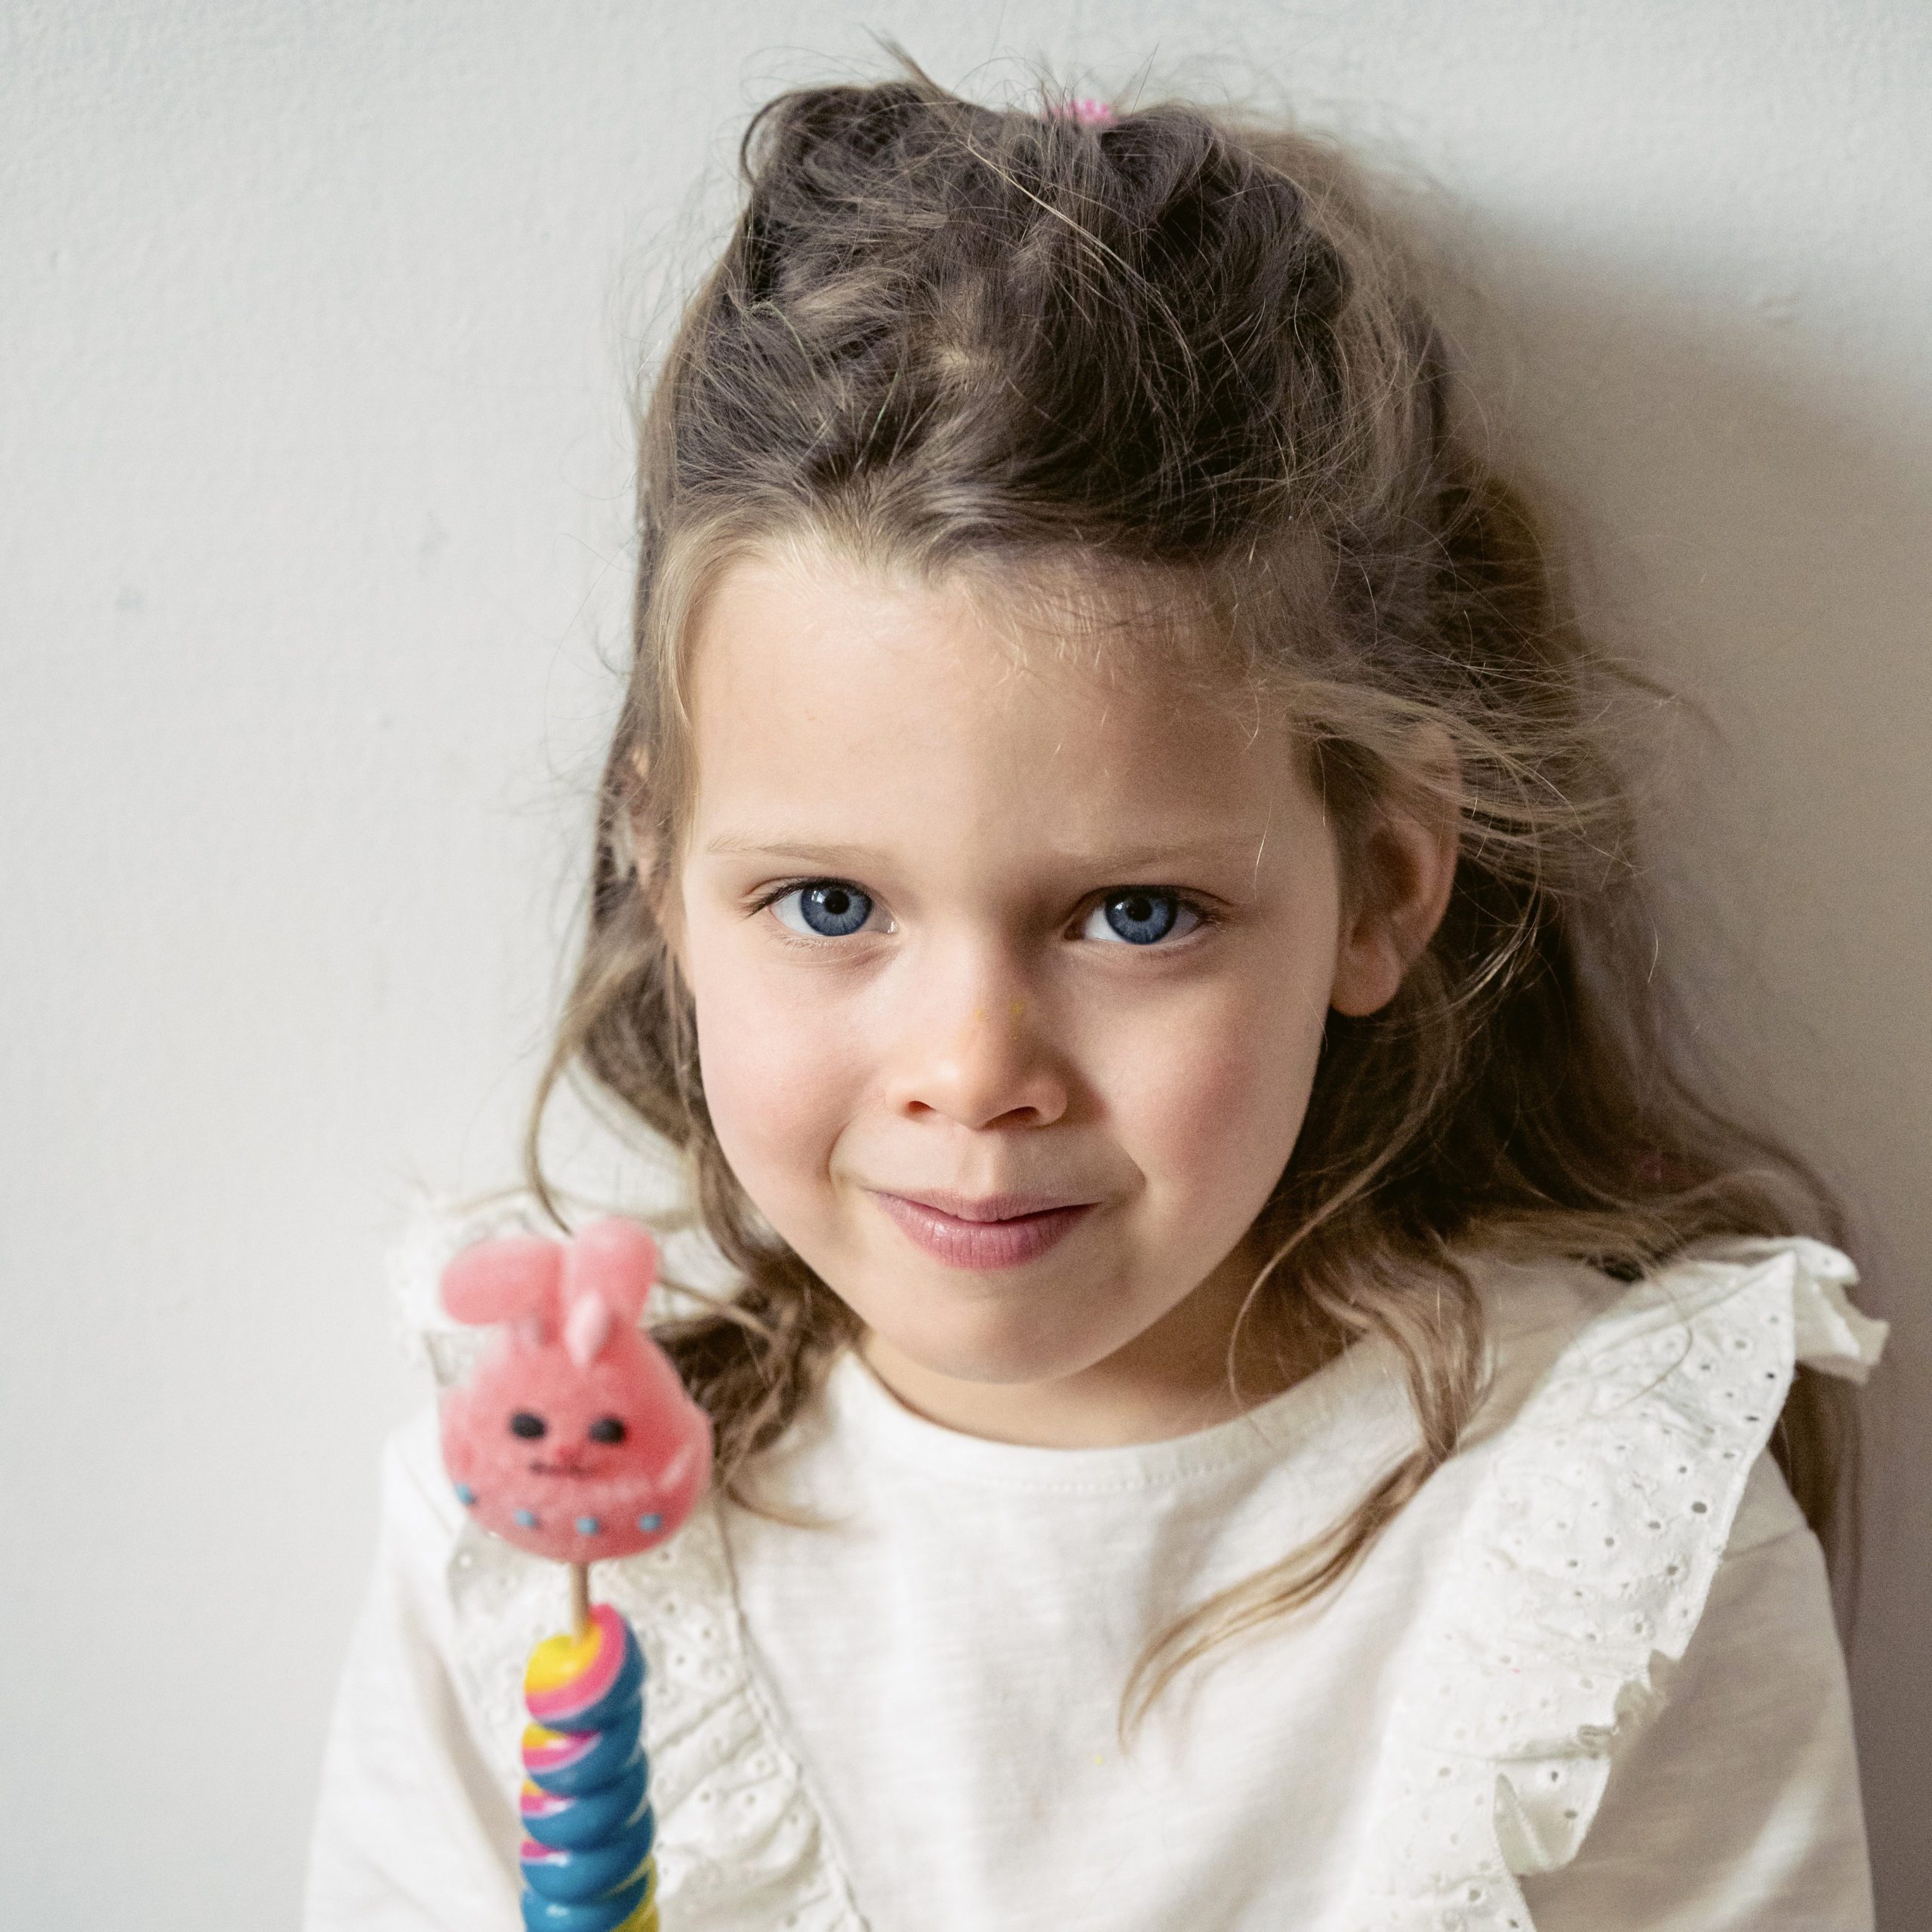 little girl wearing white and holding a stick with a pink bunny on tip | kids and budgets | Positively Jane